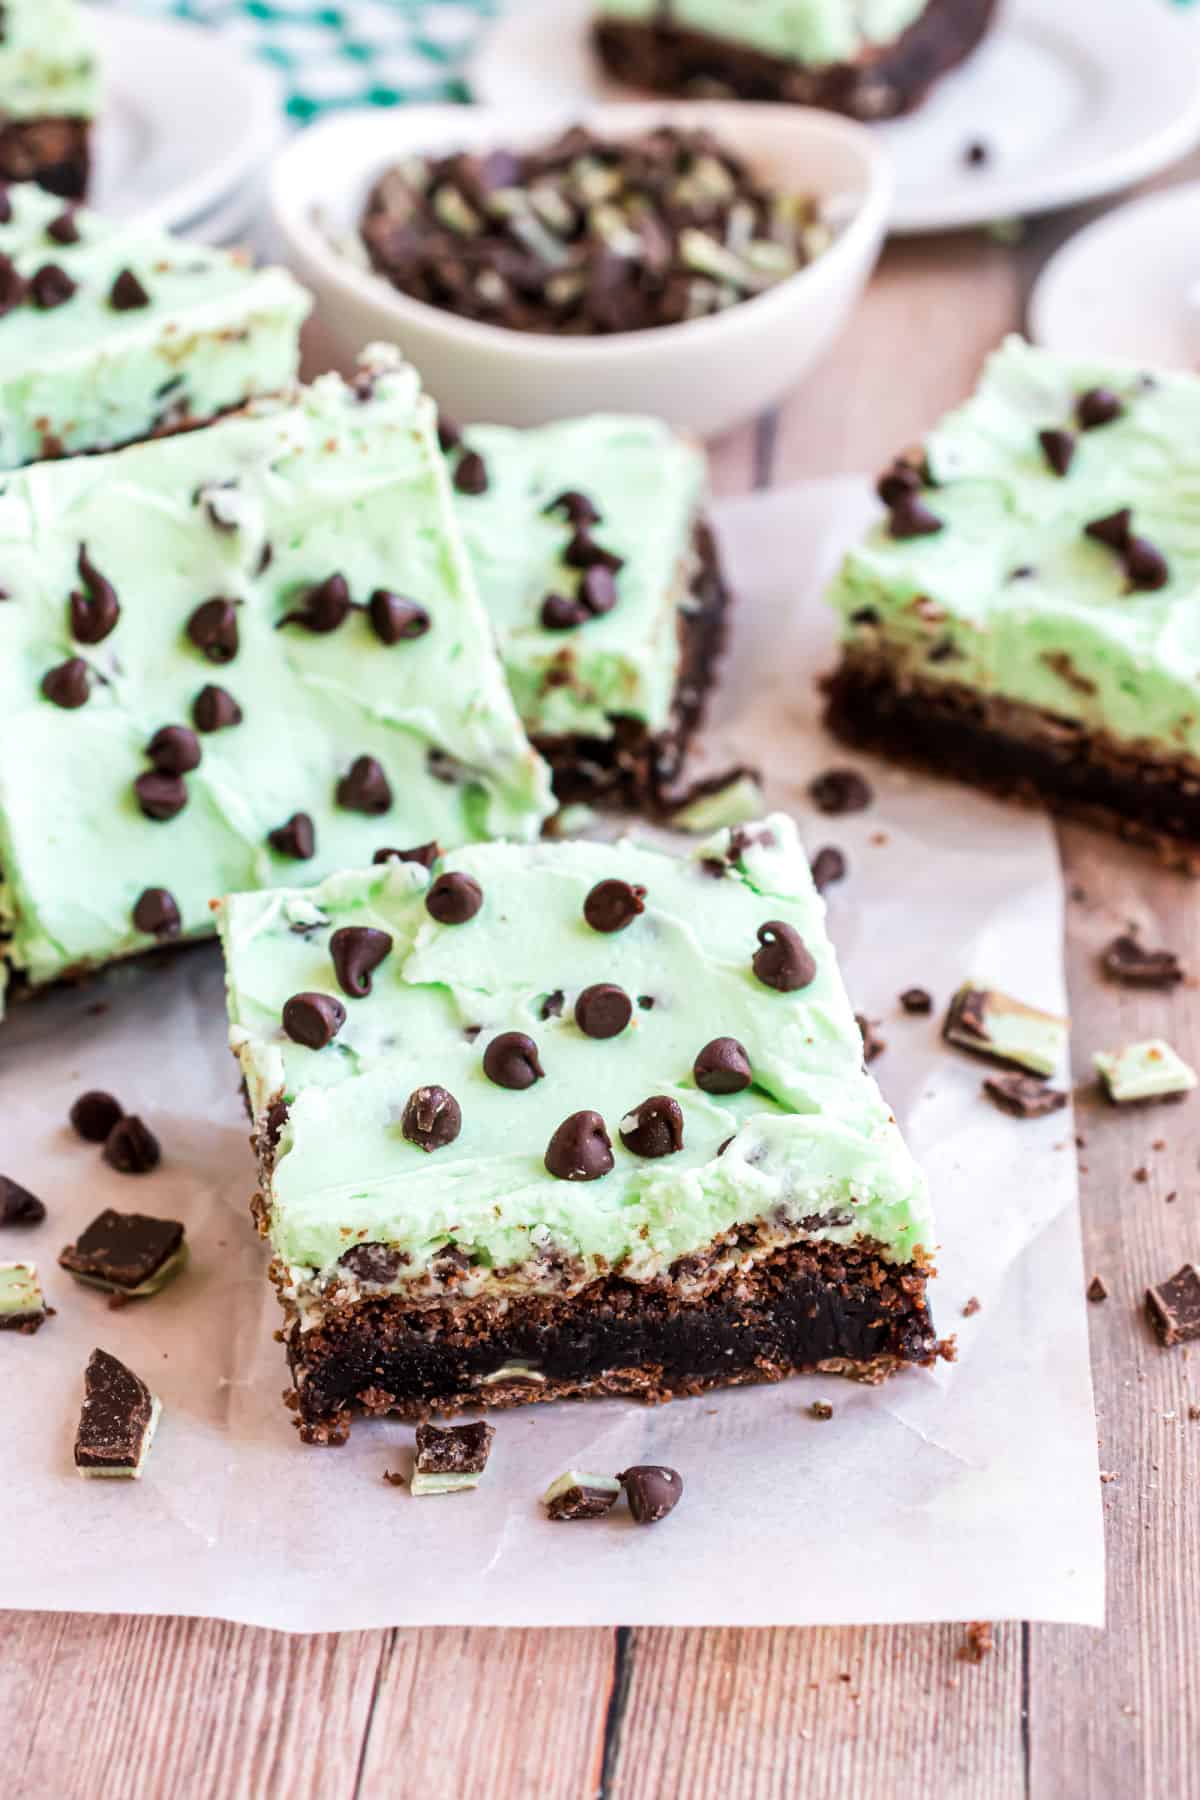 Mint chocolate chip frosting on brownies.